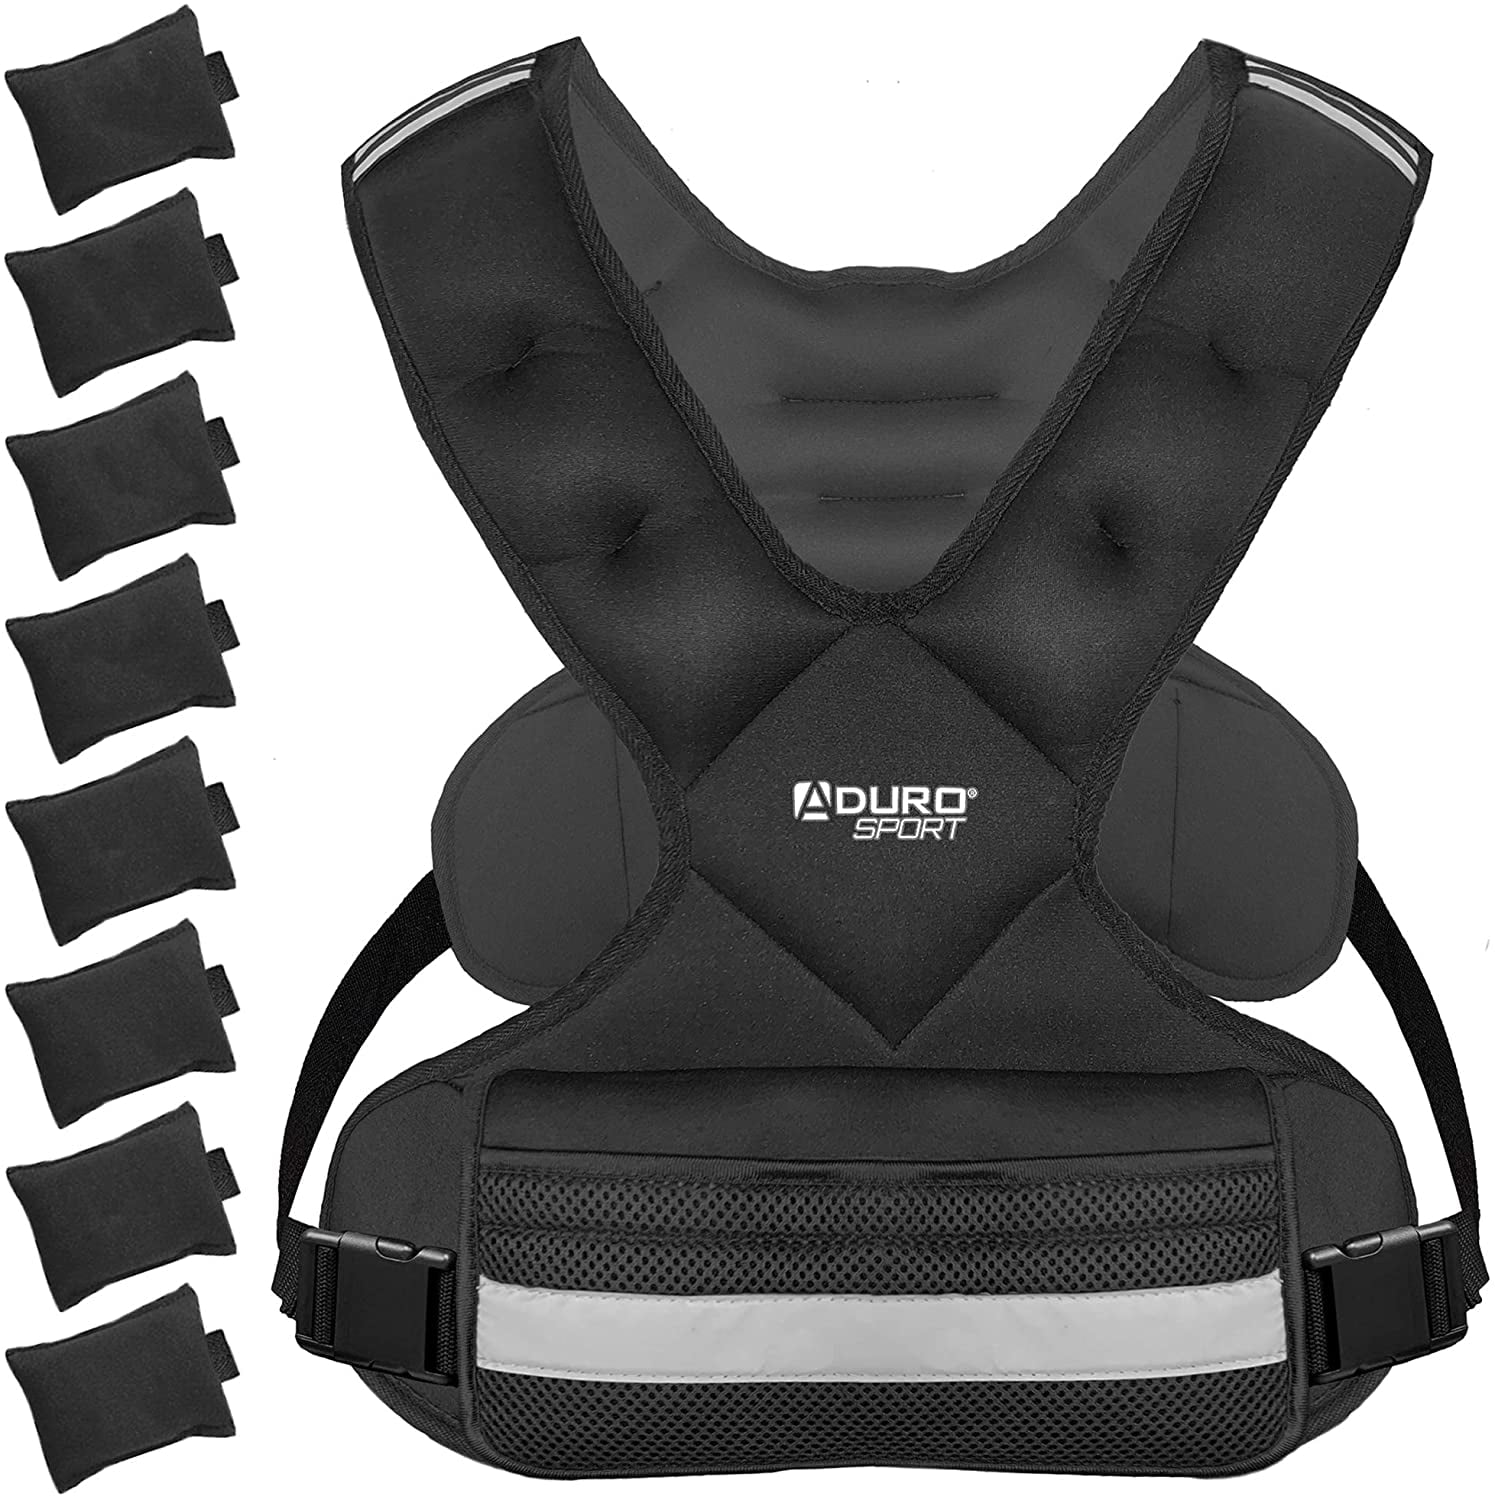 Multicolor Sport Weighted Vest Workout Equipment 44lbs Body Weight Vest for Men and Women Voberry Weighted Vest 